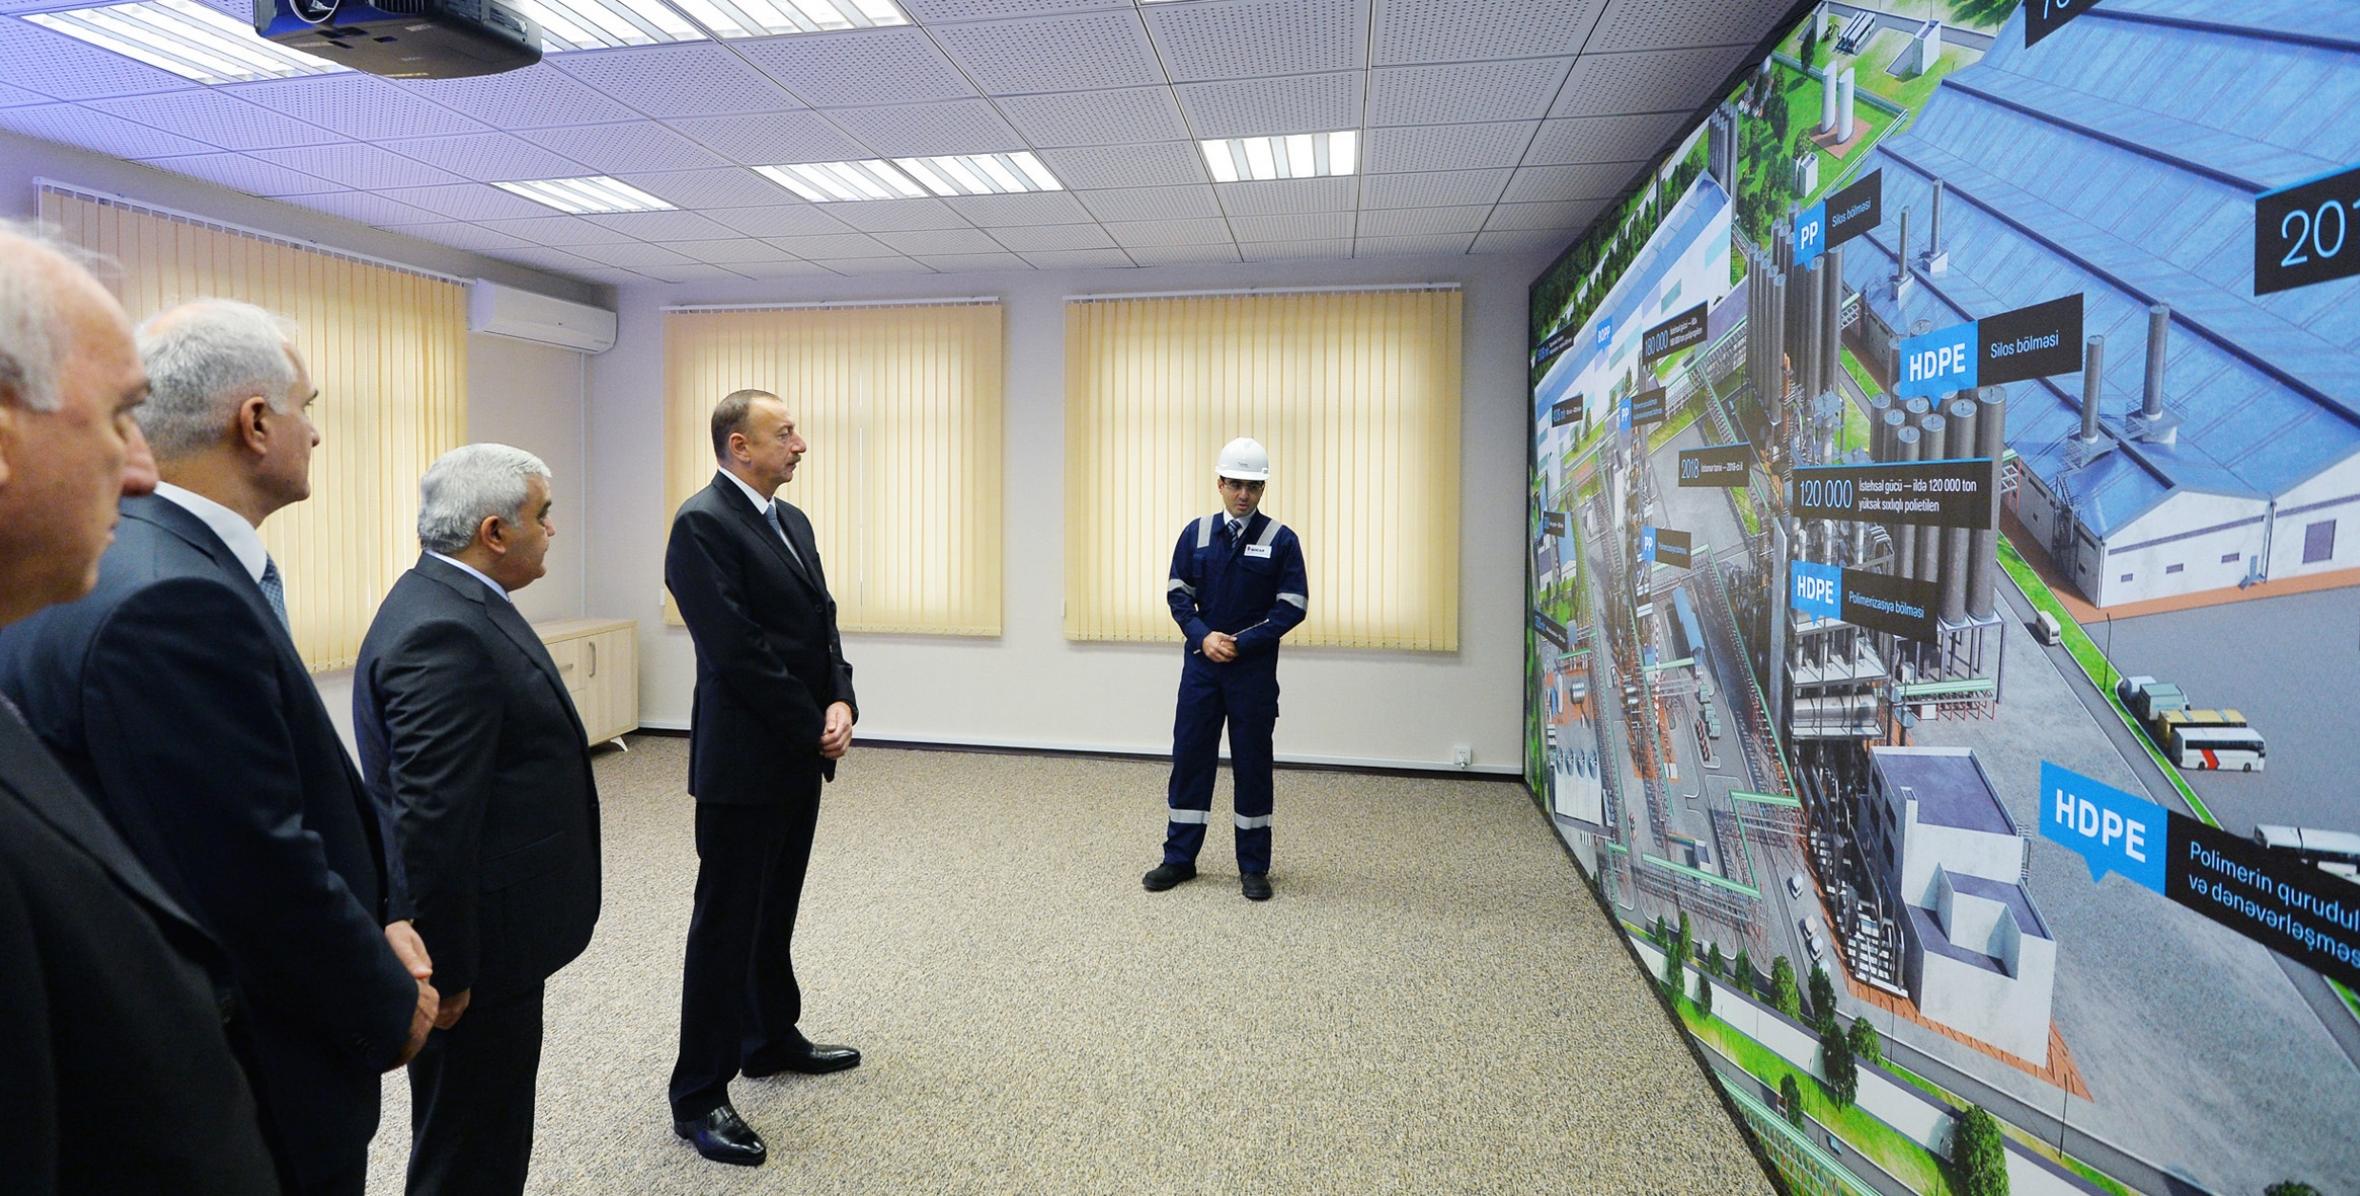 Ilham Aliyev participated in the groundbreaking ceremony of the Hıgh Densıty Polyethylene Plant in Sumgayit